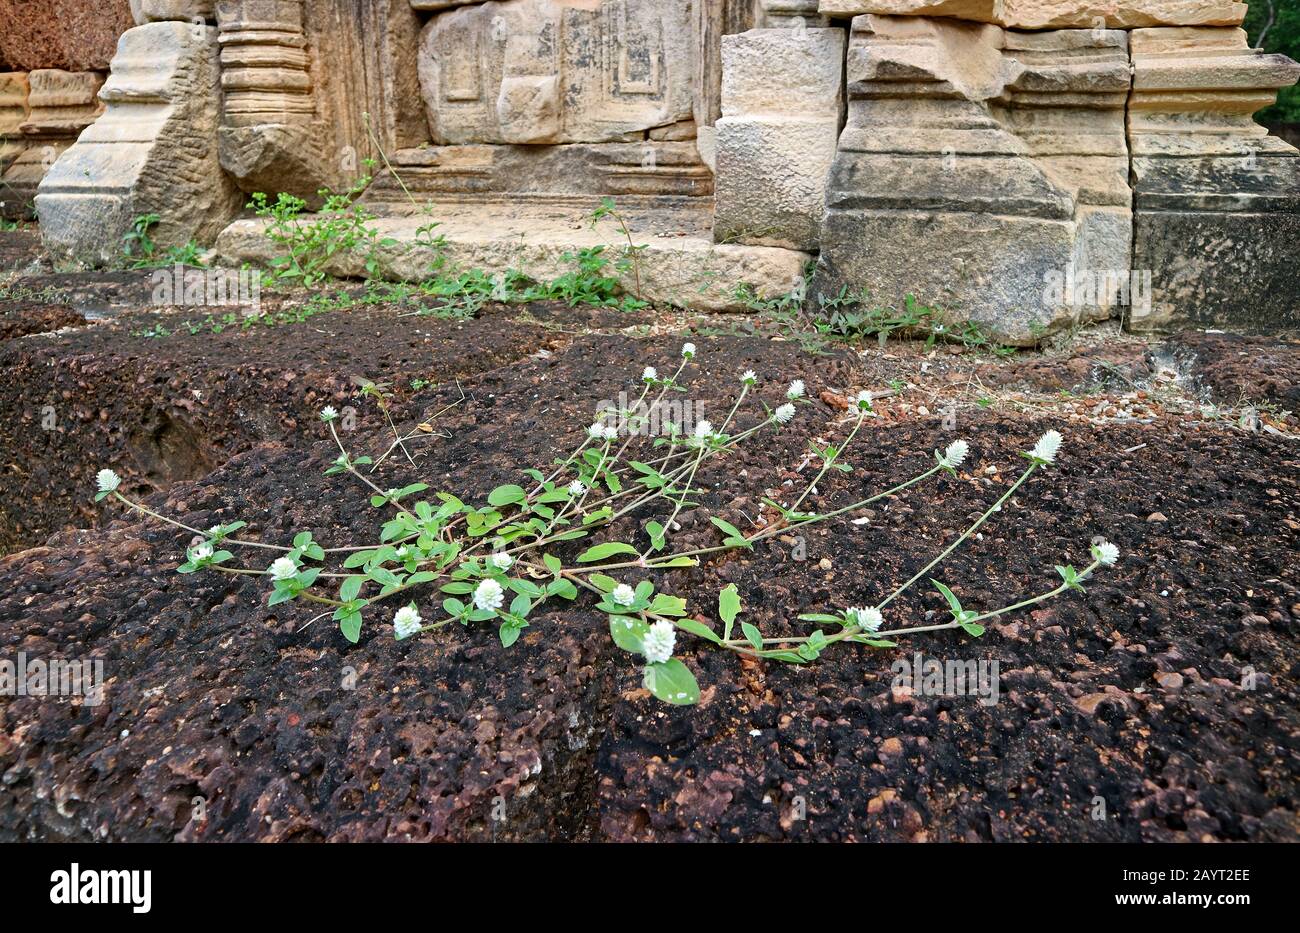 White Globe Amaranth Flowers Growing on the Sandstone Ground of the Ancient Khmer Temple Stock Photo